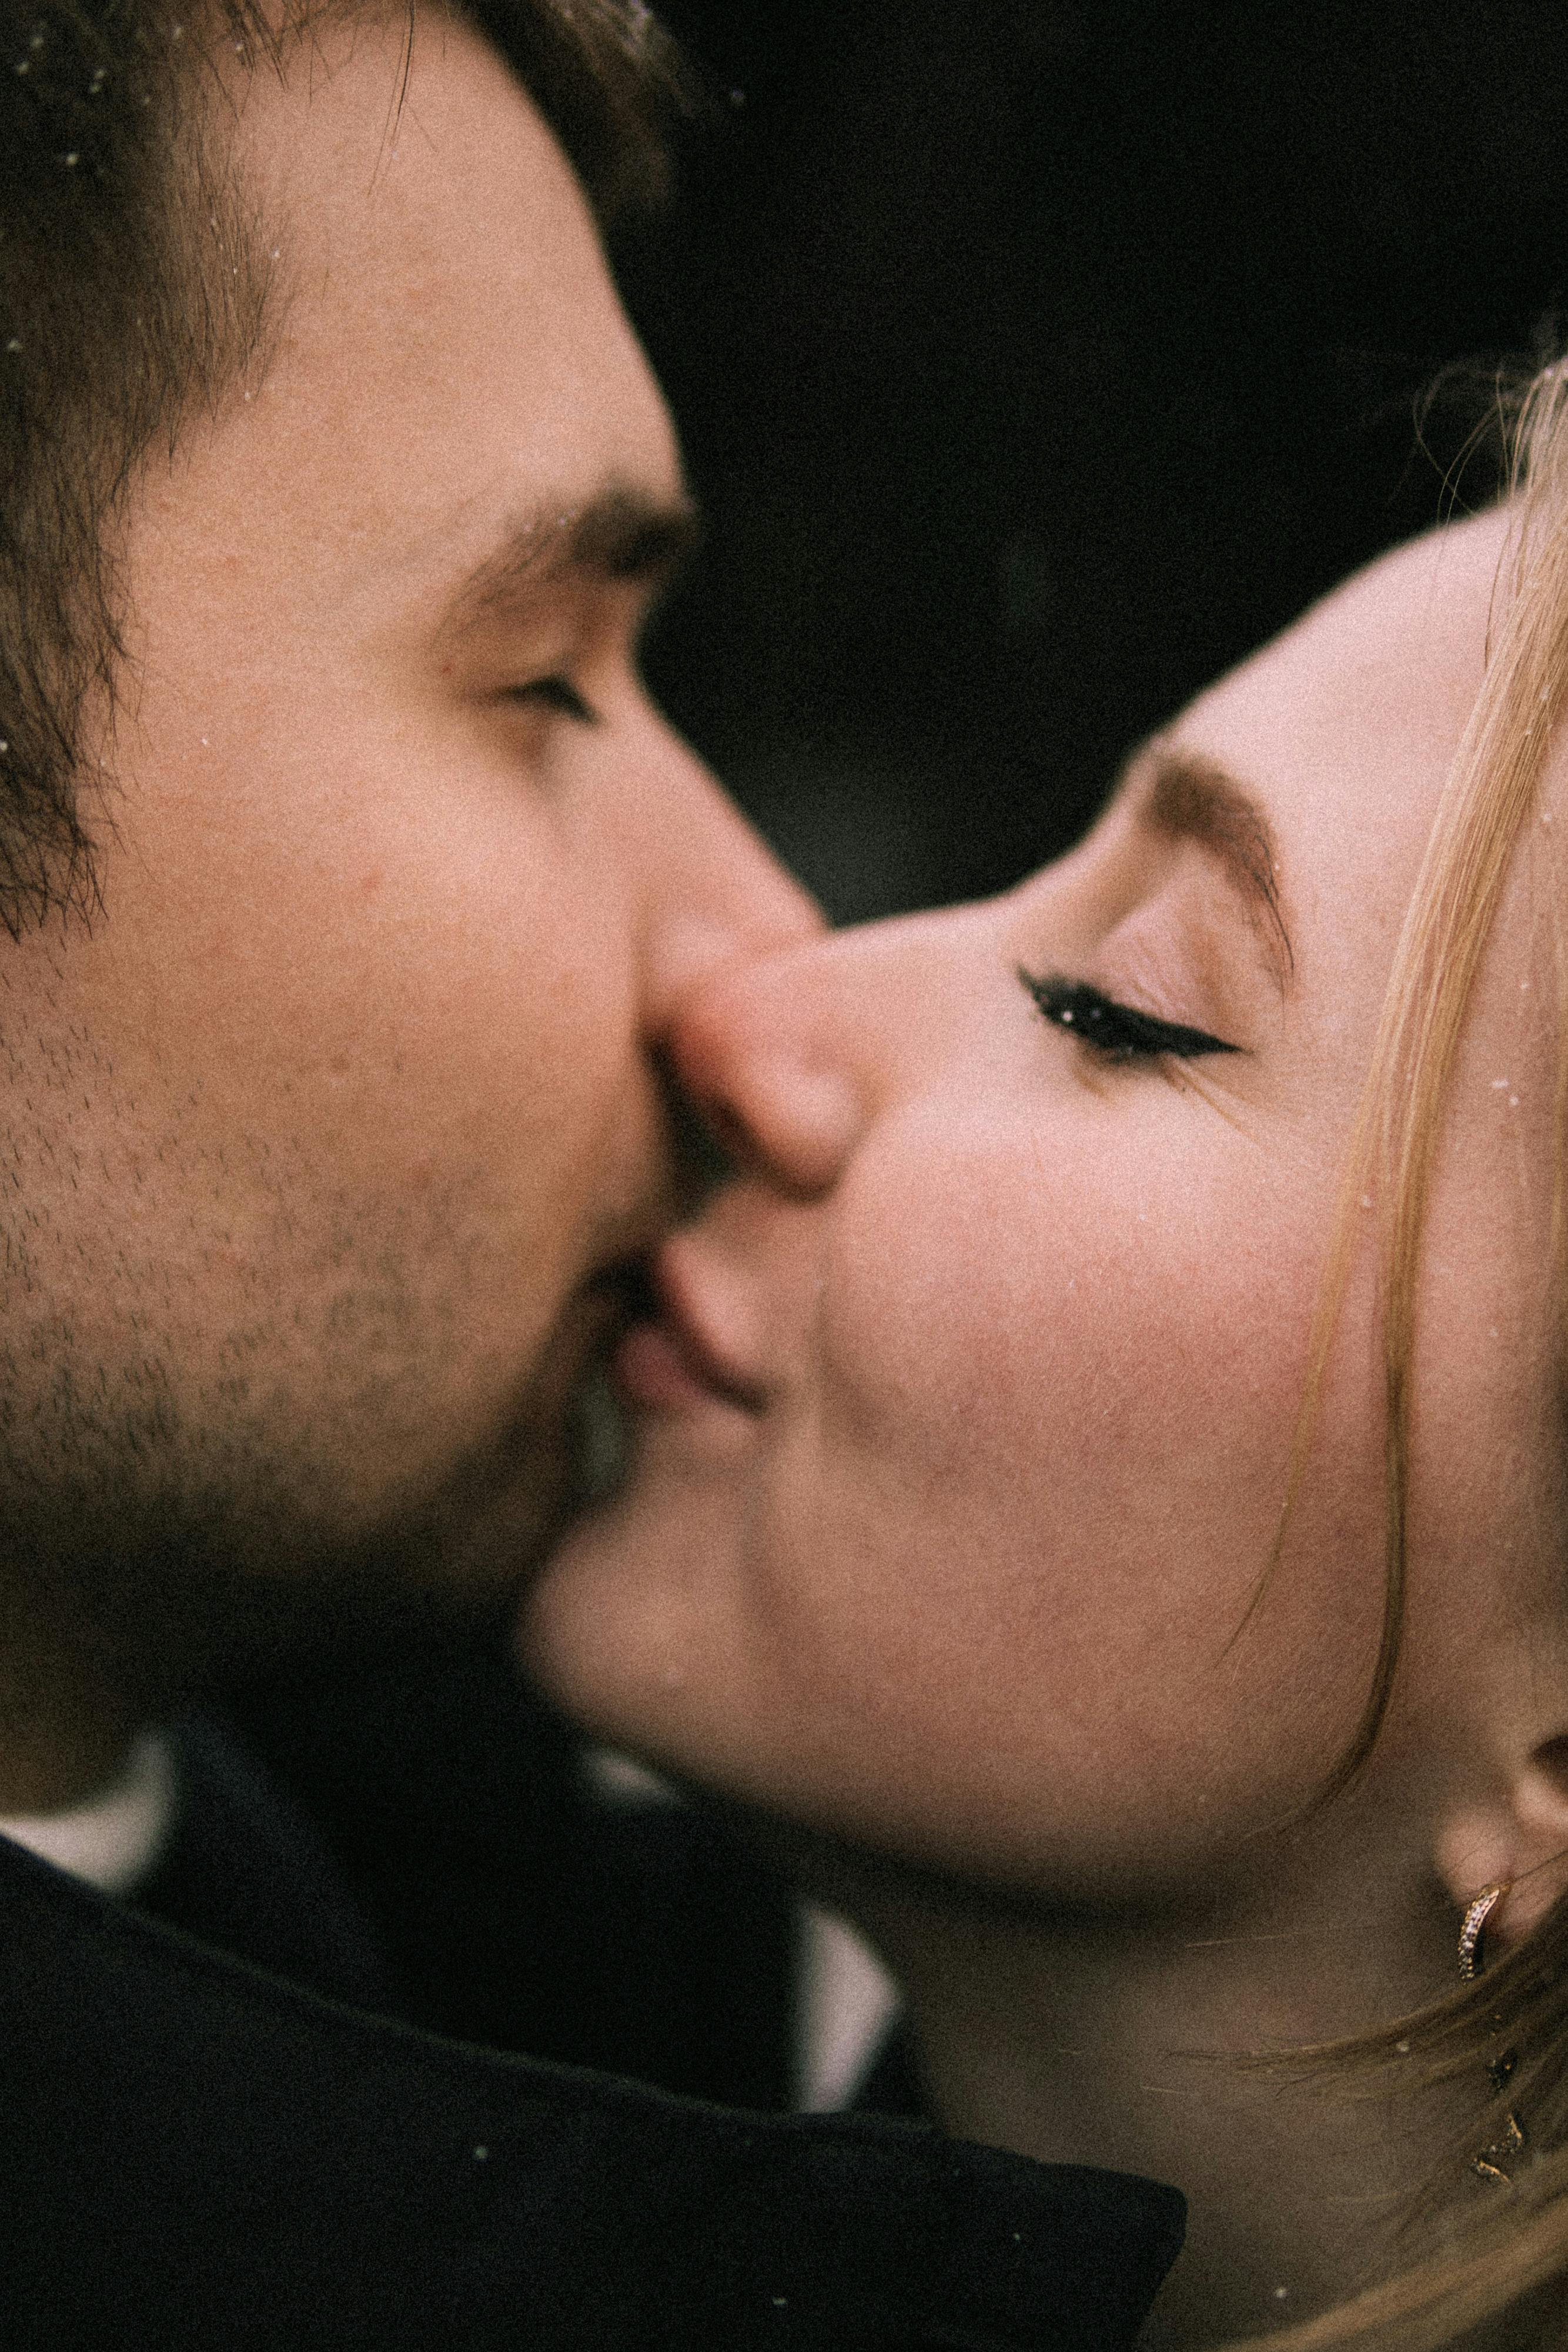 A woman and a man kissing | Source: Pexels